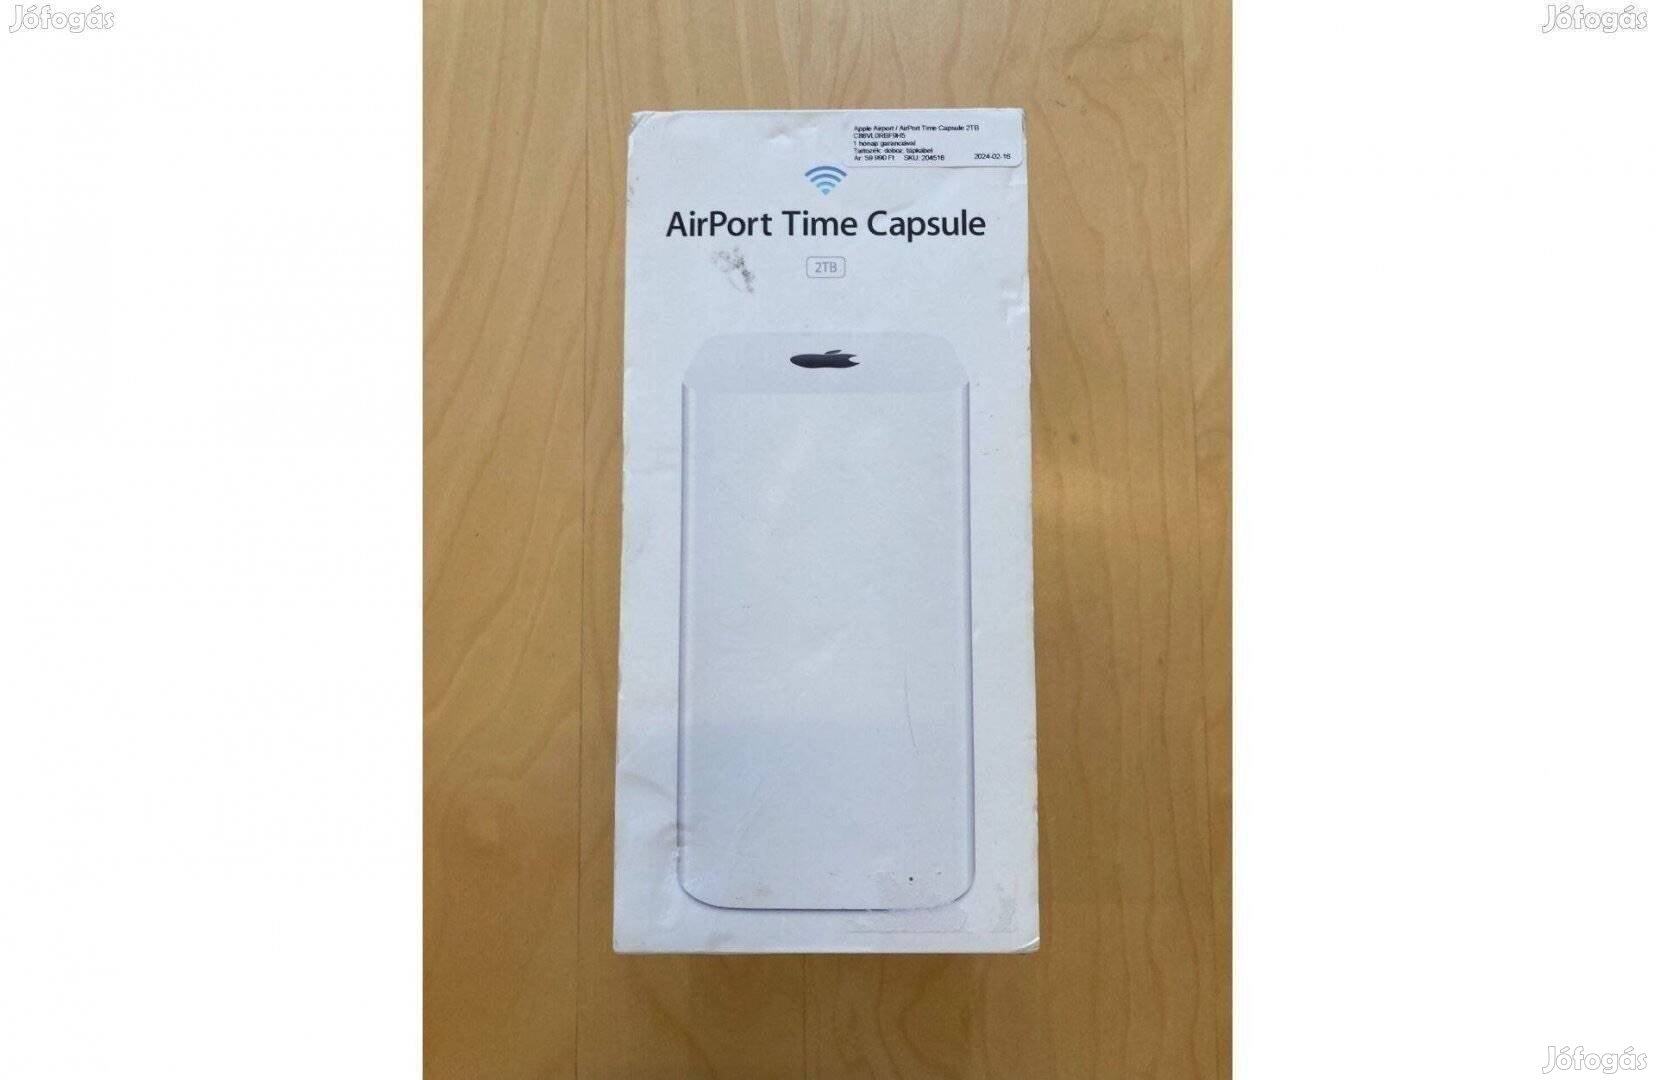 Airport Time Capsule Wifi Router 2TB